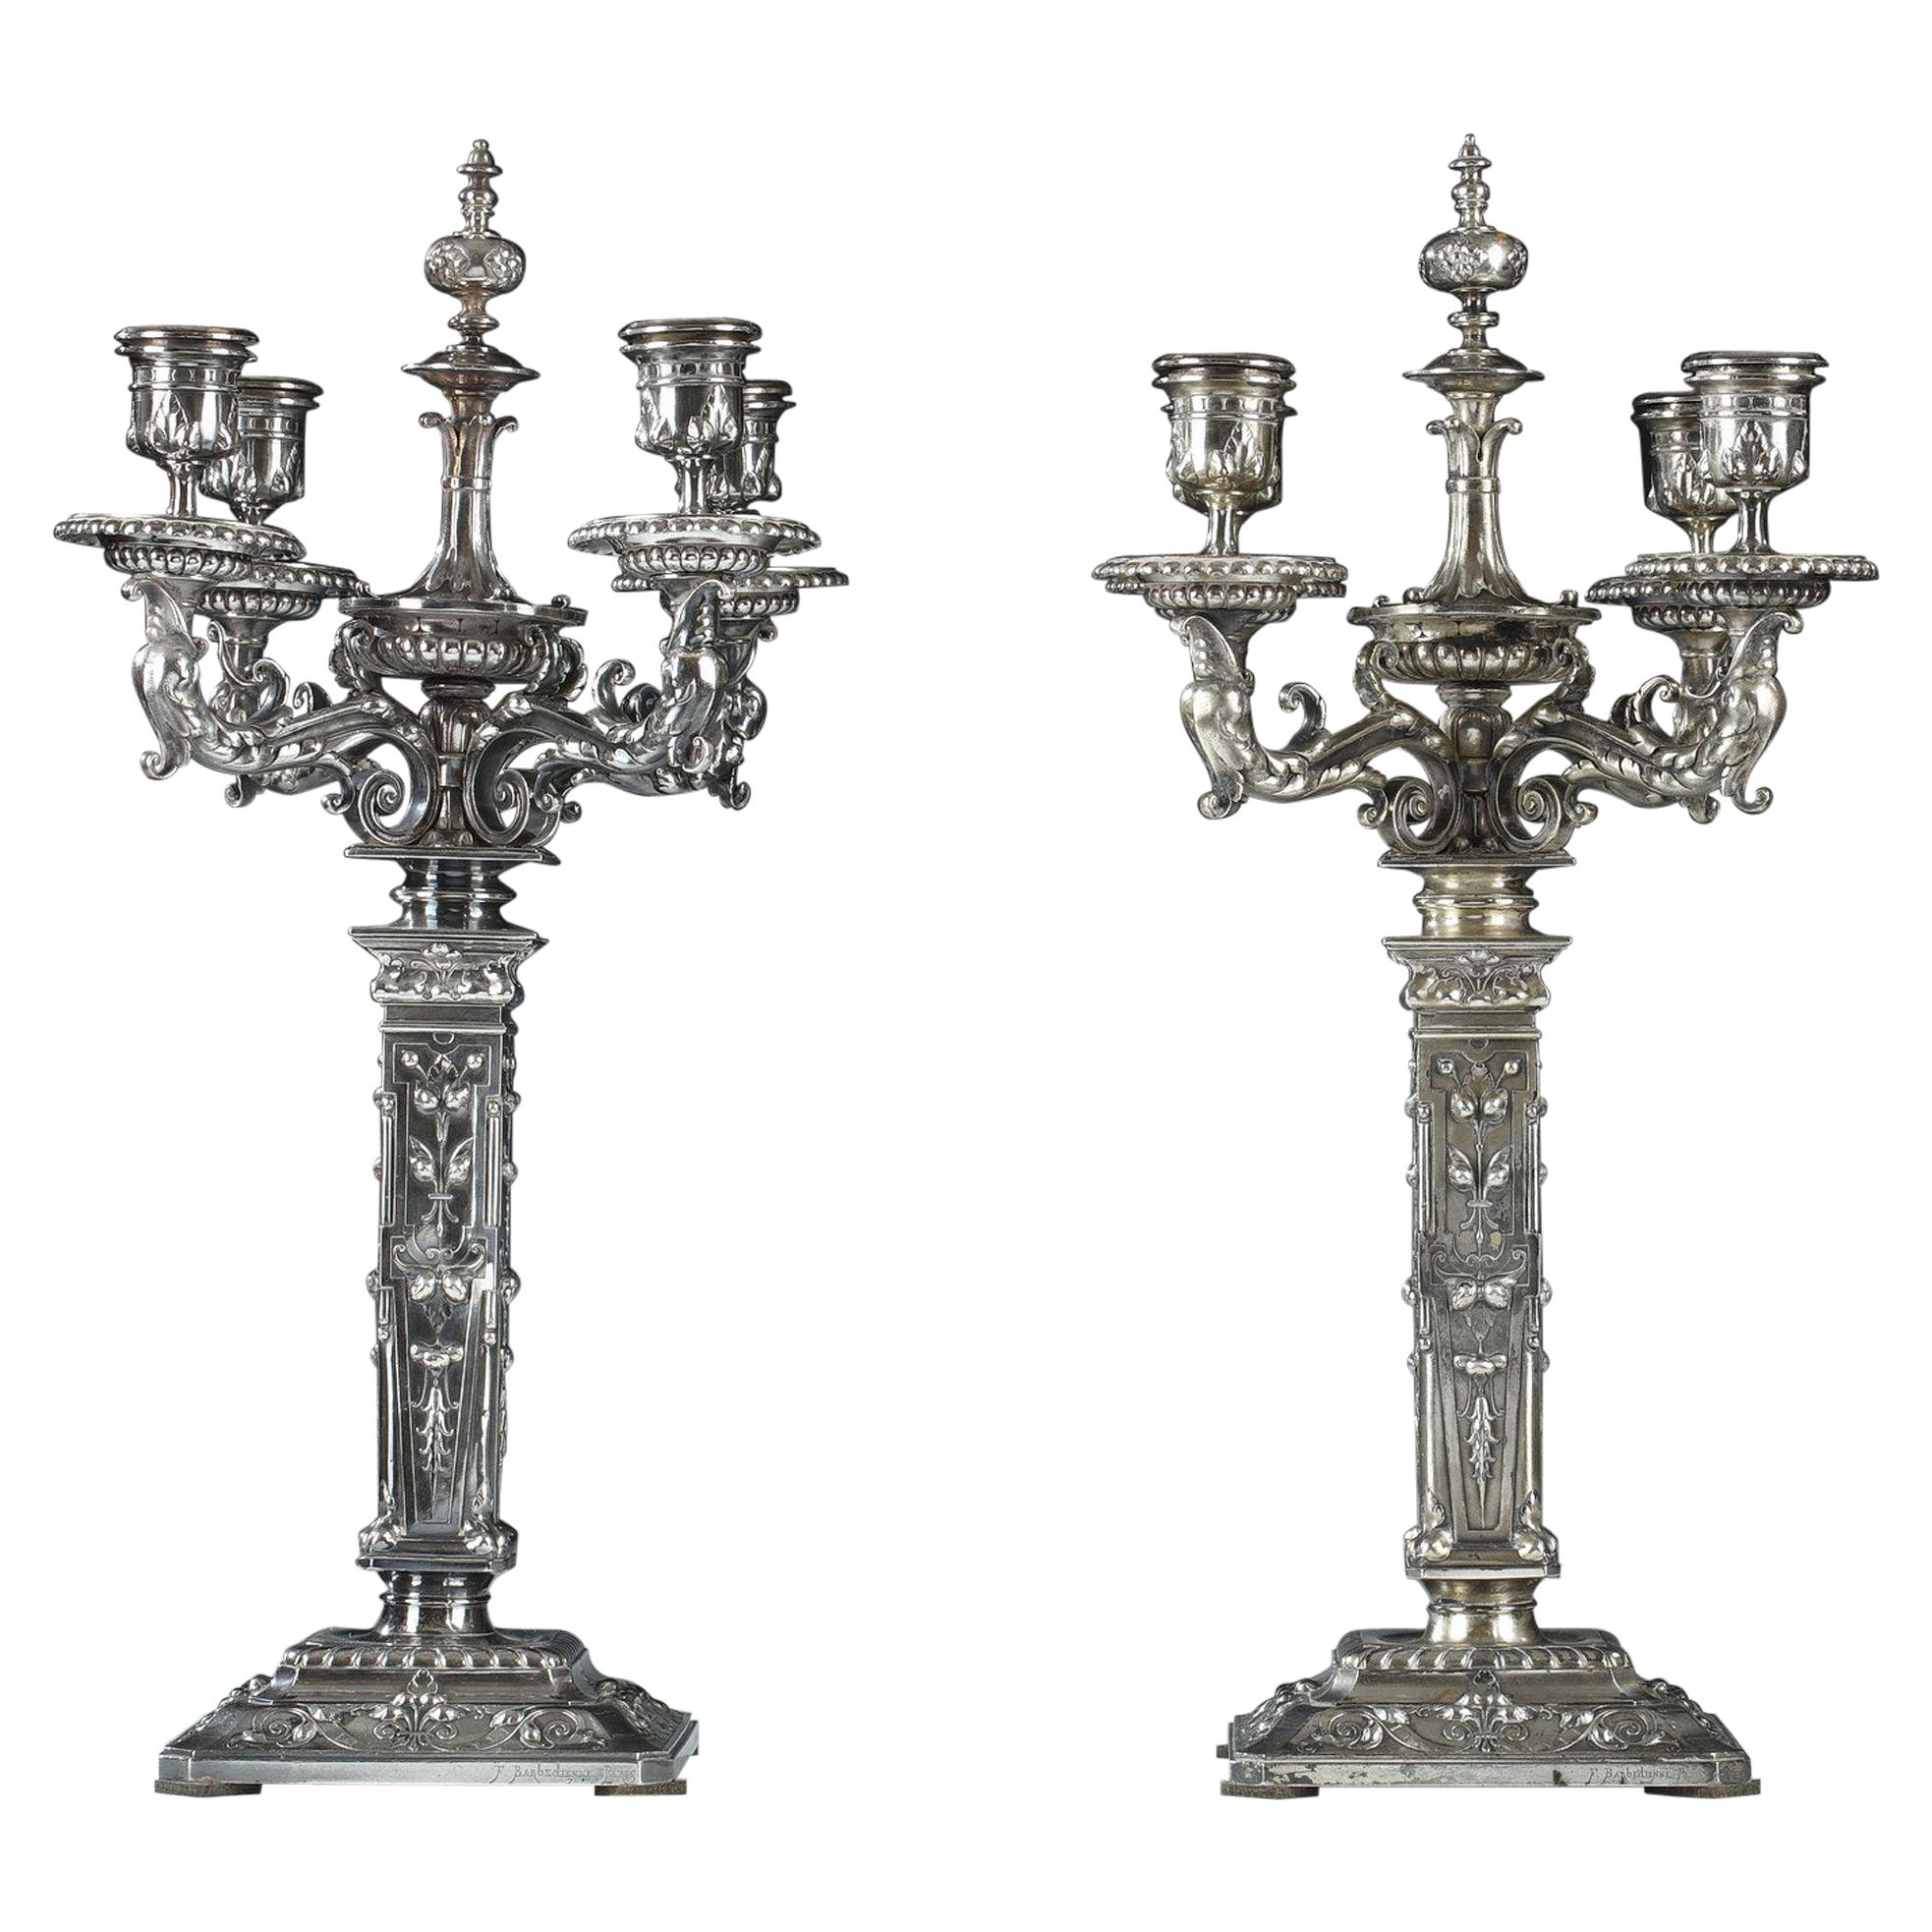 Pair of Candelabras by F. Barbedienne, L-C. Sevin and D. Attarge, France, 1869